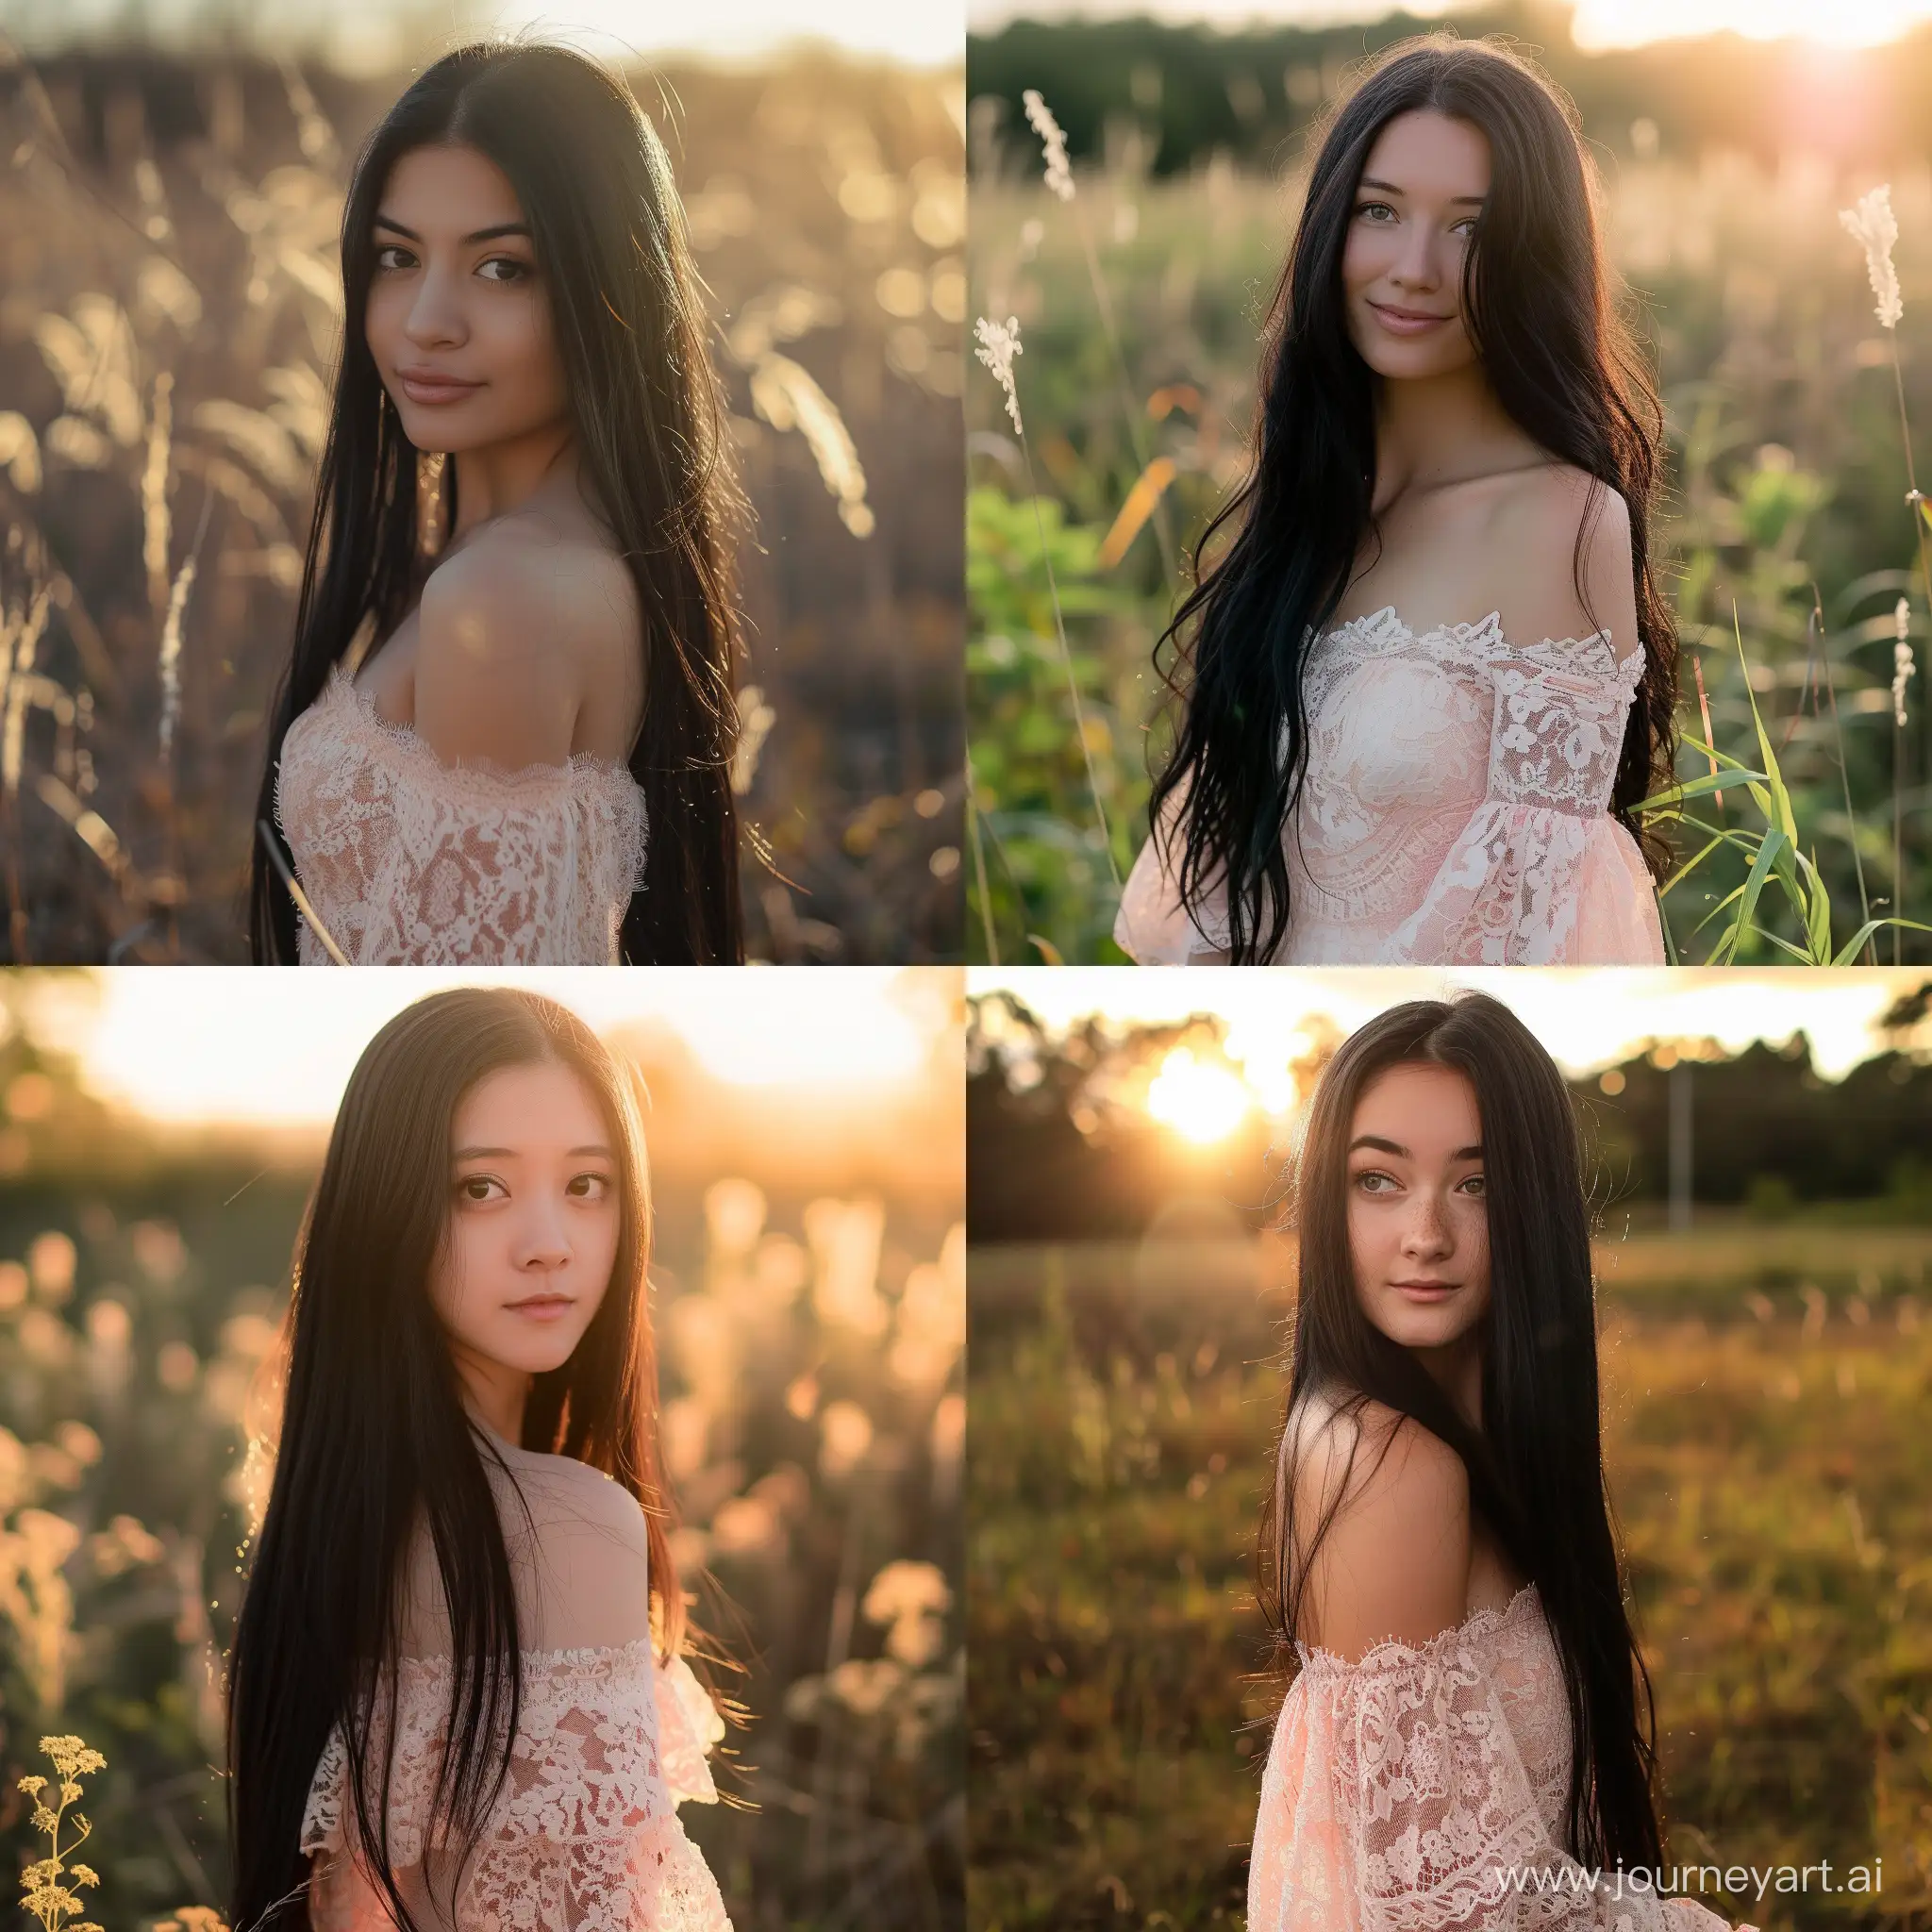 Girl with long black hair in a light pink lace off-shoulder dress during golden hour aesthetic profile picture